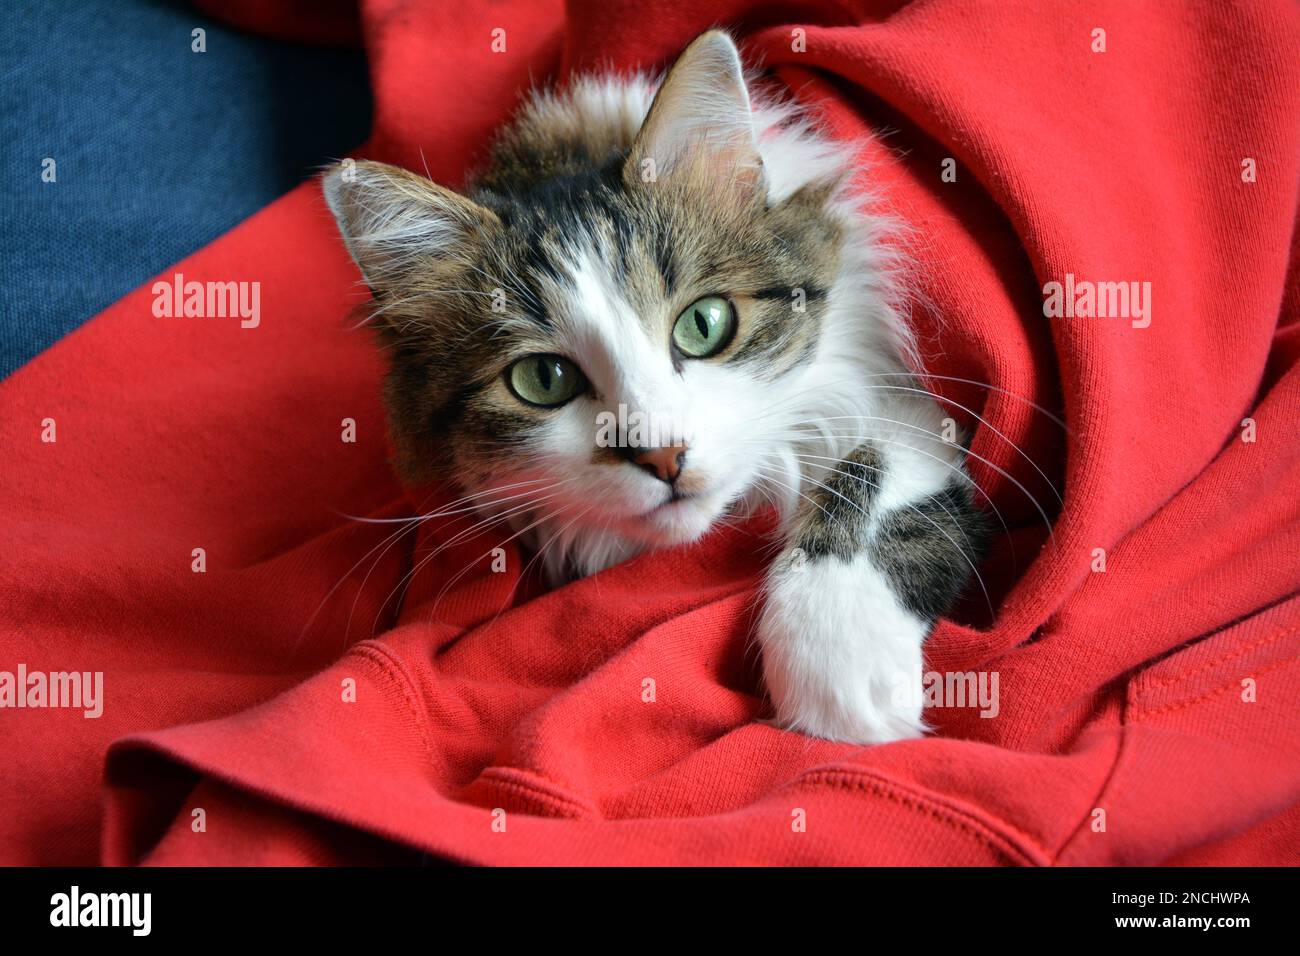 Closeup of a cute tabby domestic cat with long fur and green eyes wrapped in a red sweater on a dark blue sofa and staring at the camera. Stock Photo